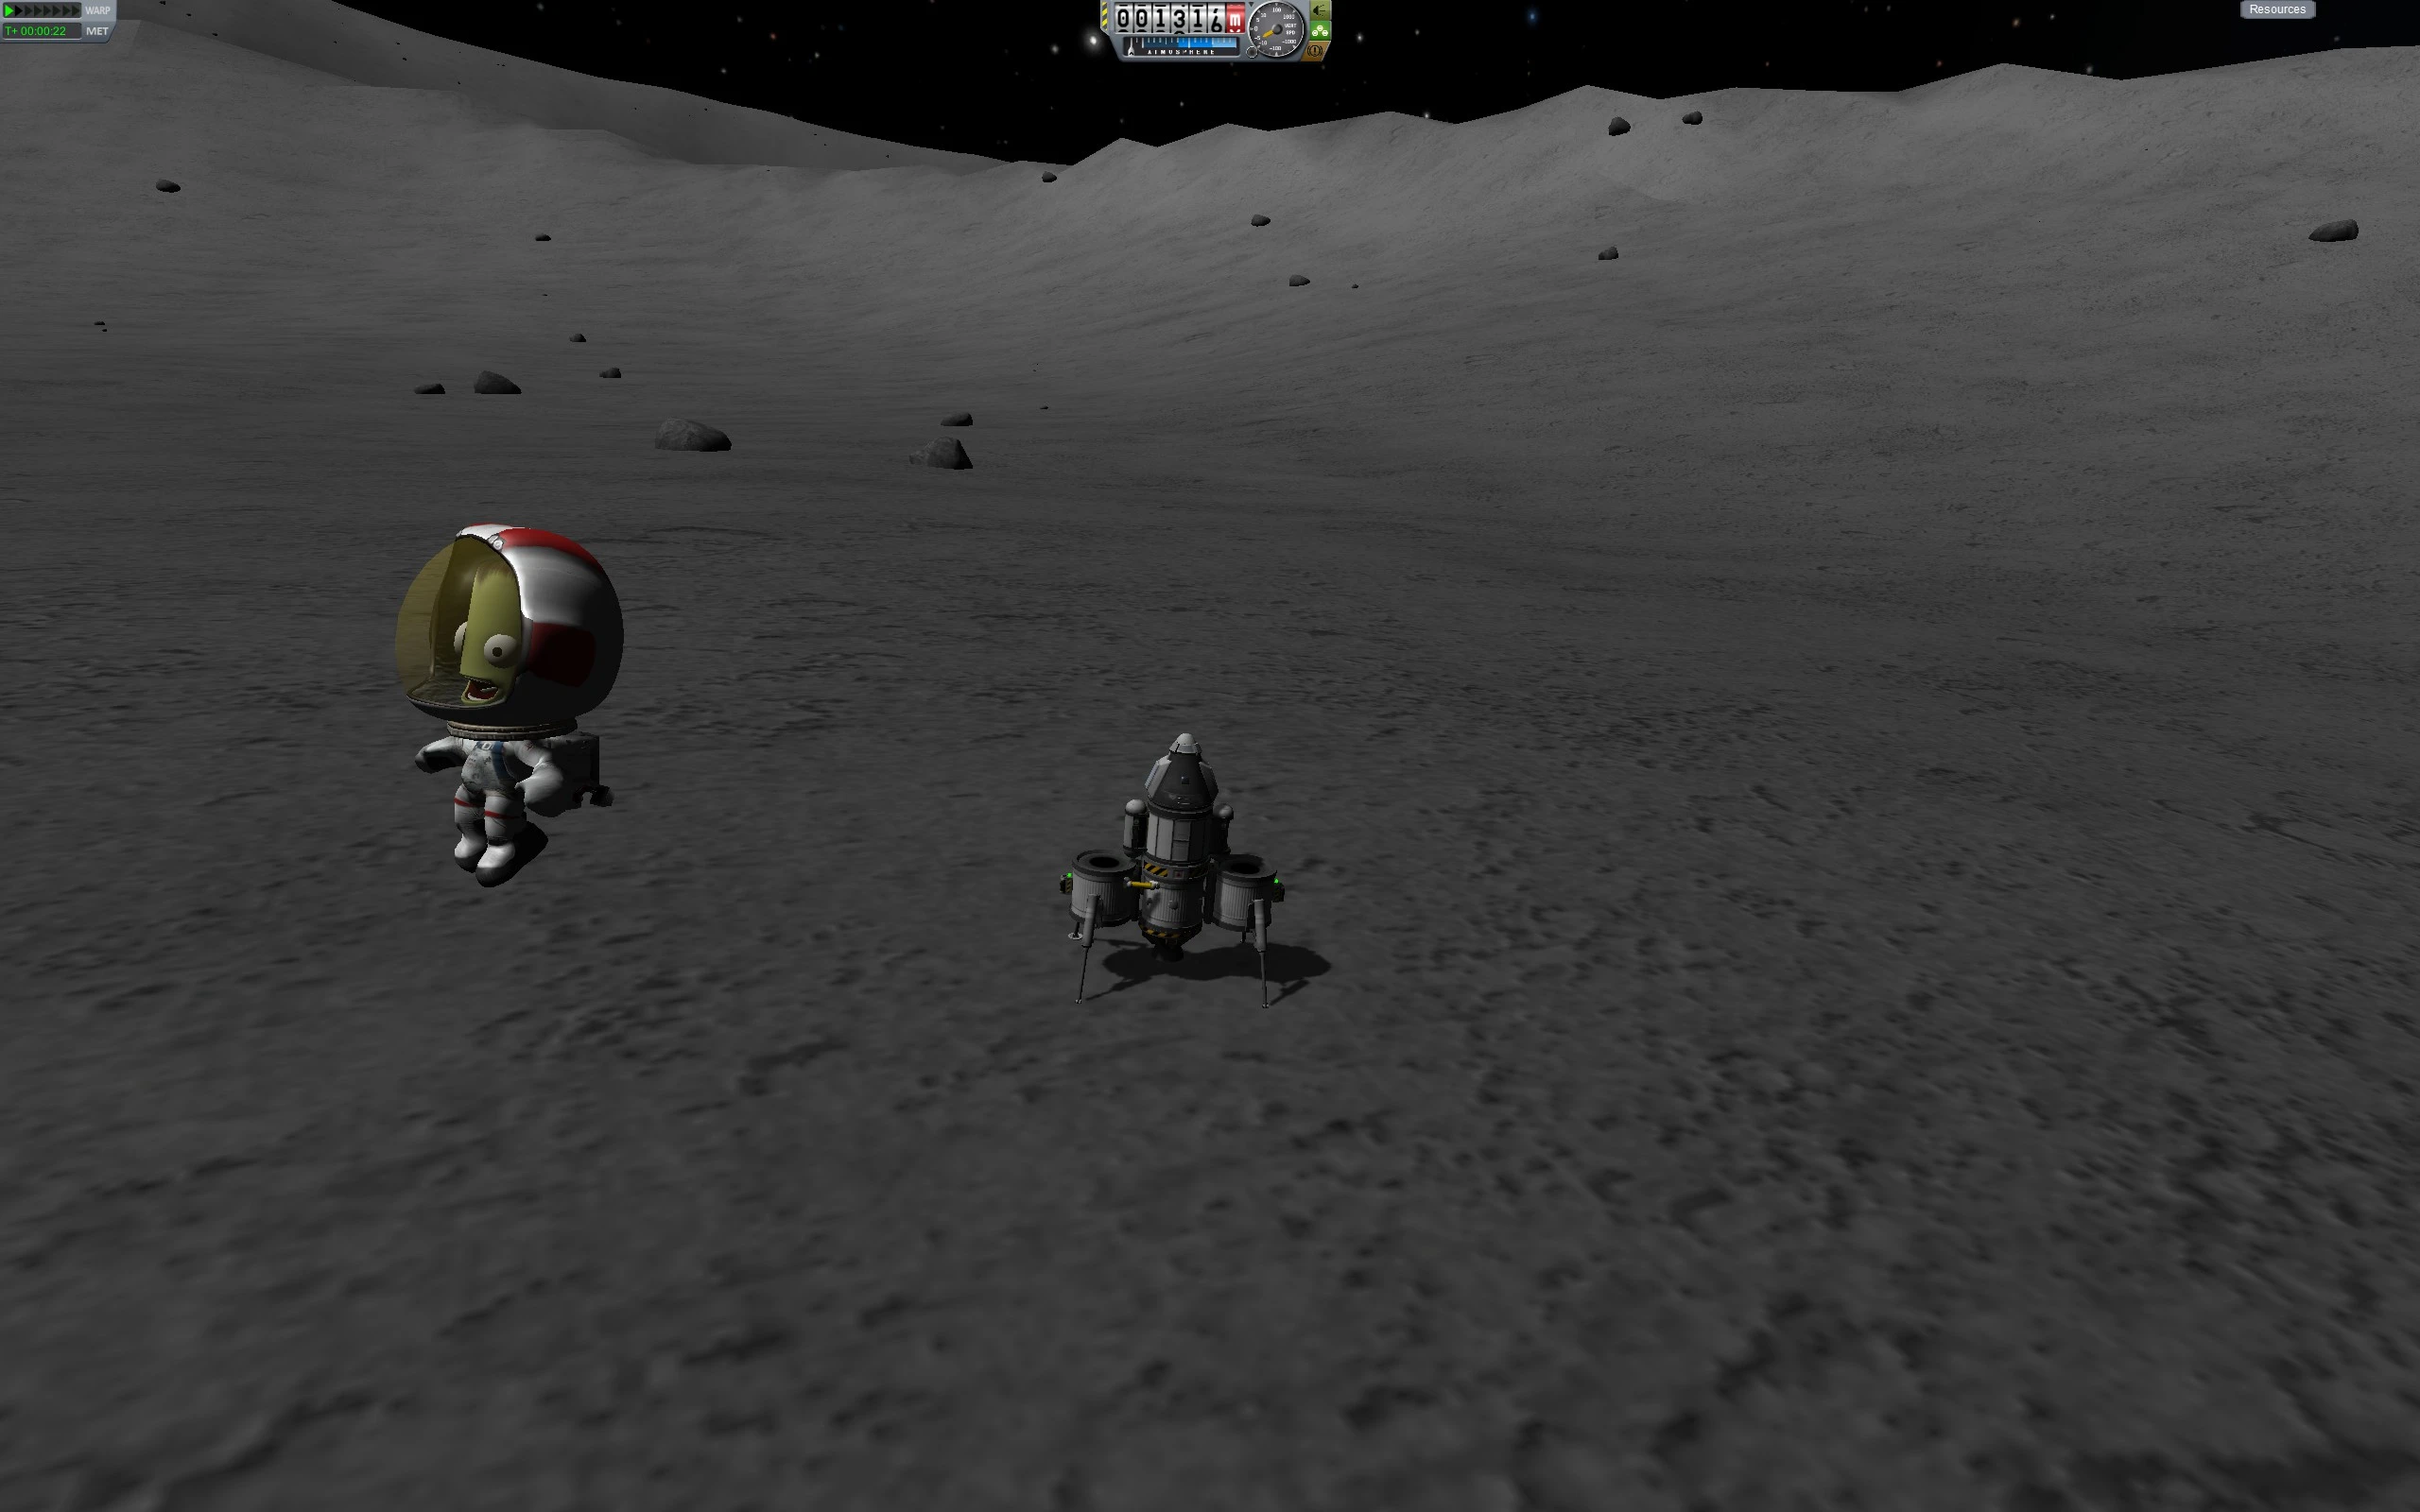 Bouncing on the Mun